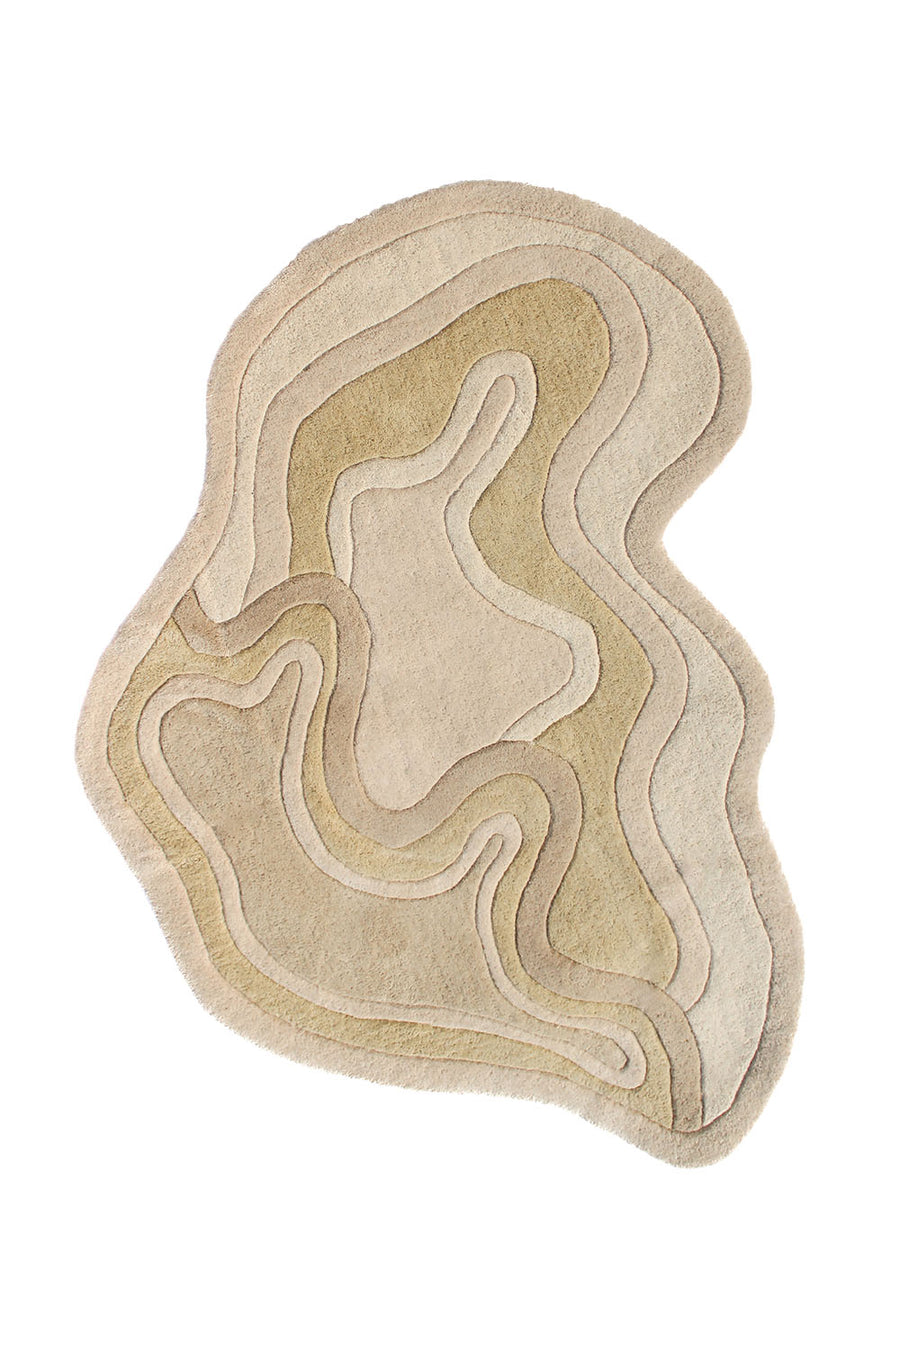 Rolling Tides Hand Tufted Wool Rug in Neutral Cream by Jubi